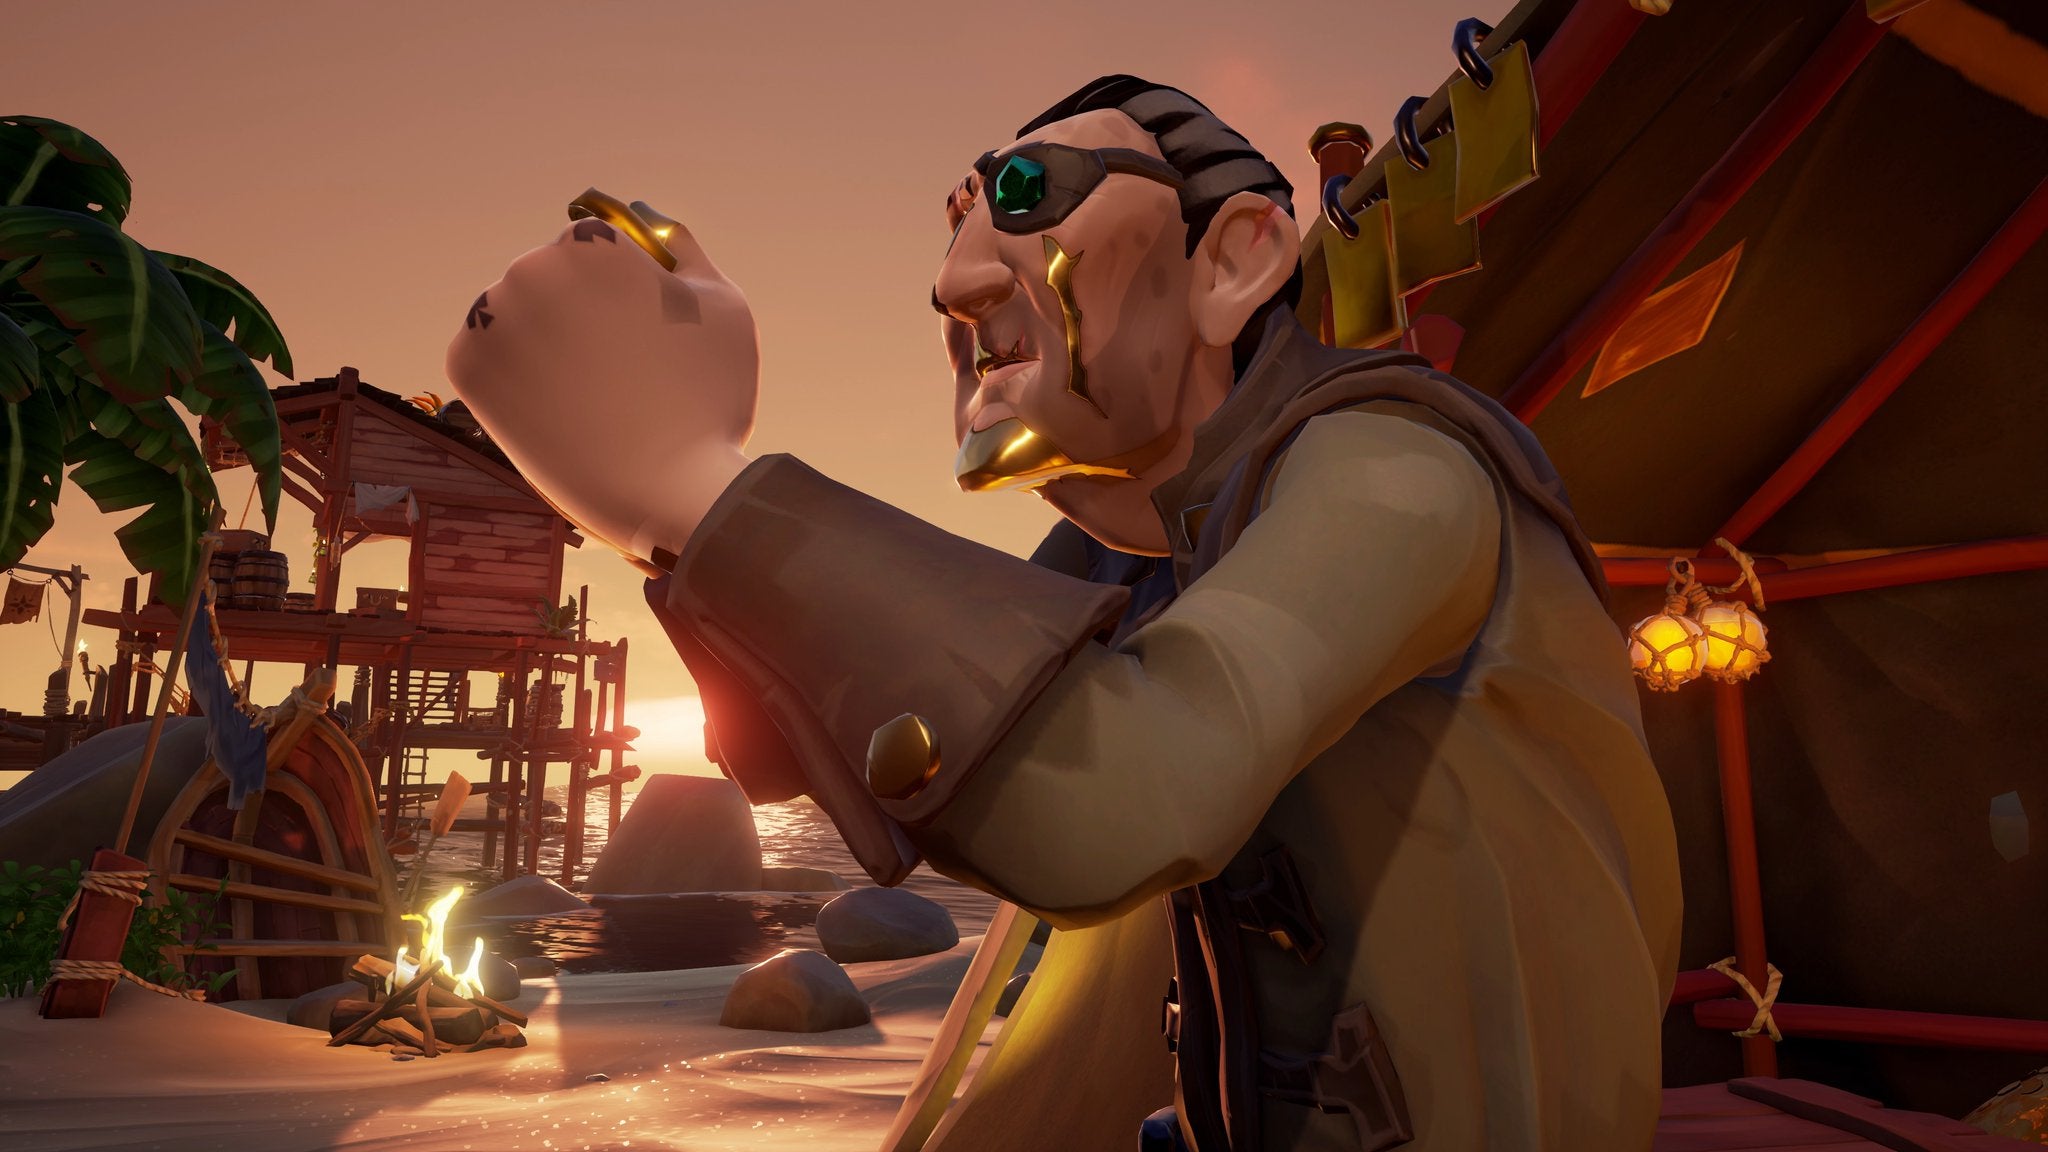 Image for Sea of Thieves has seen 10 million players since launch